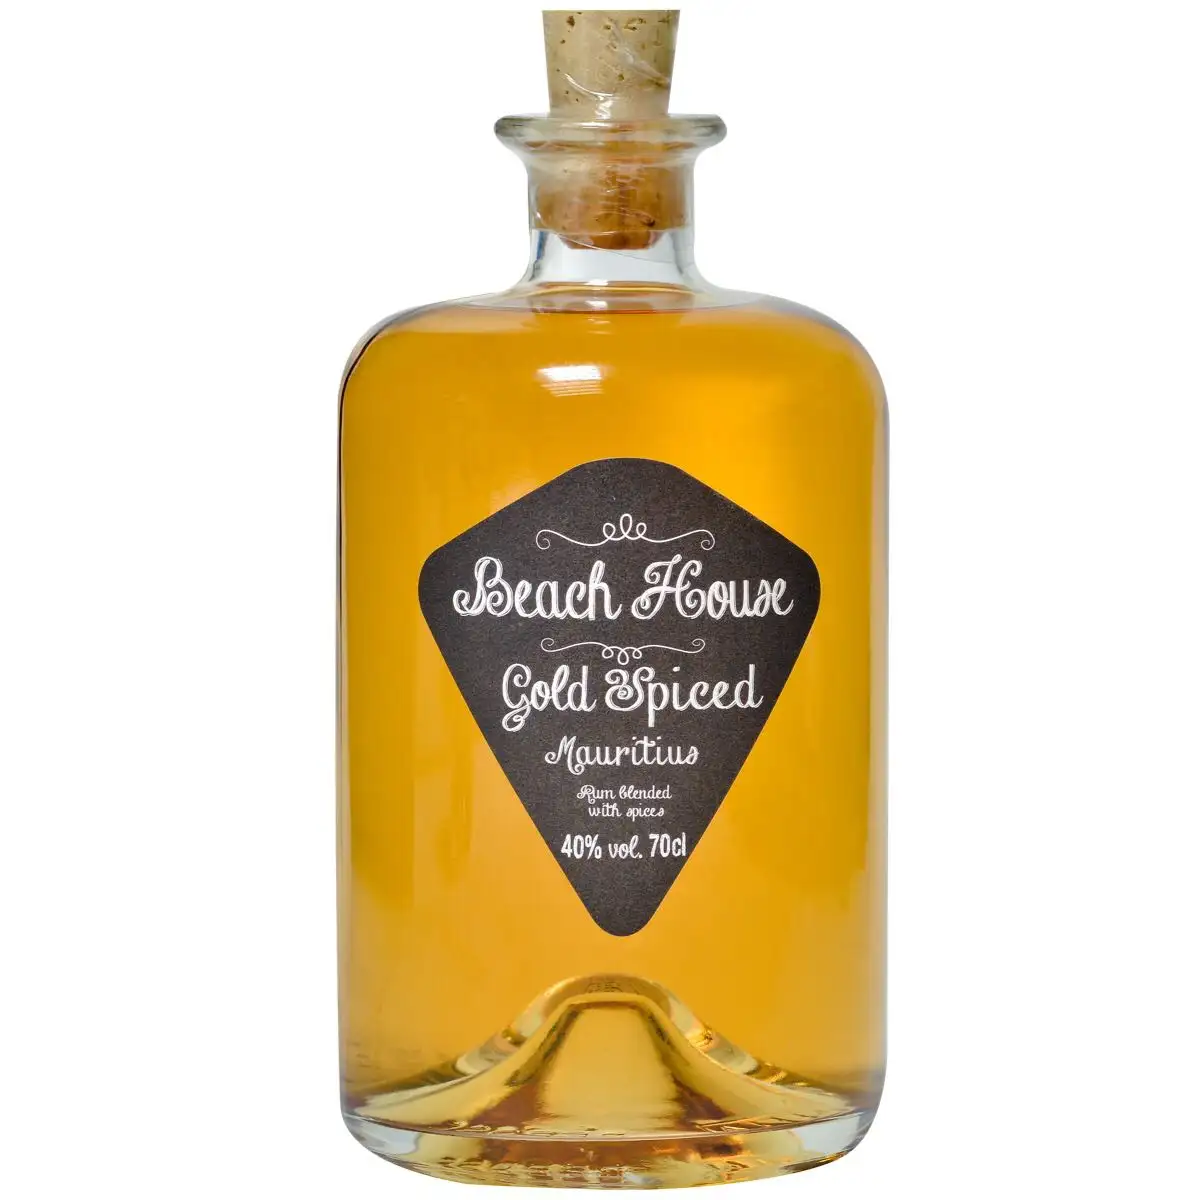 Image of the front of the bottle of the rum Beach House Gold Spiced